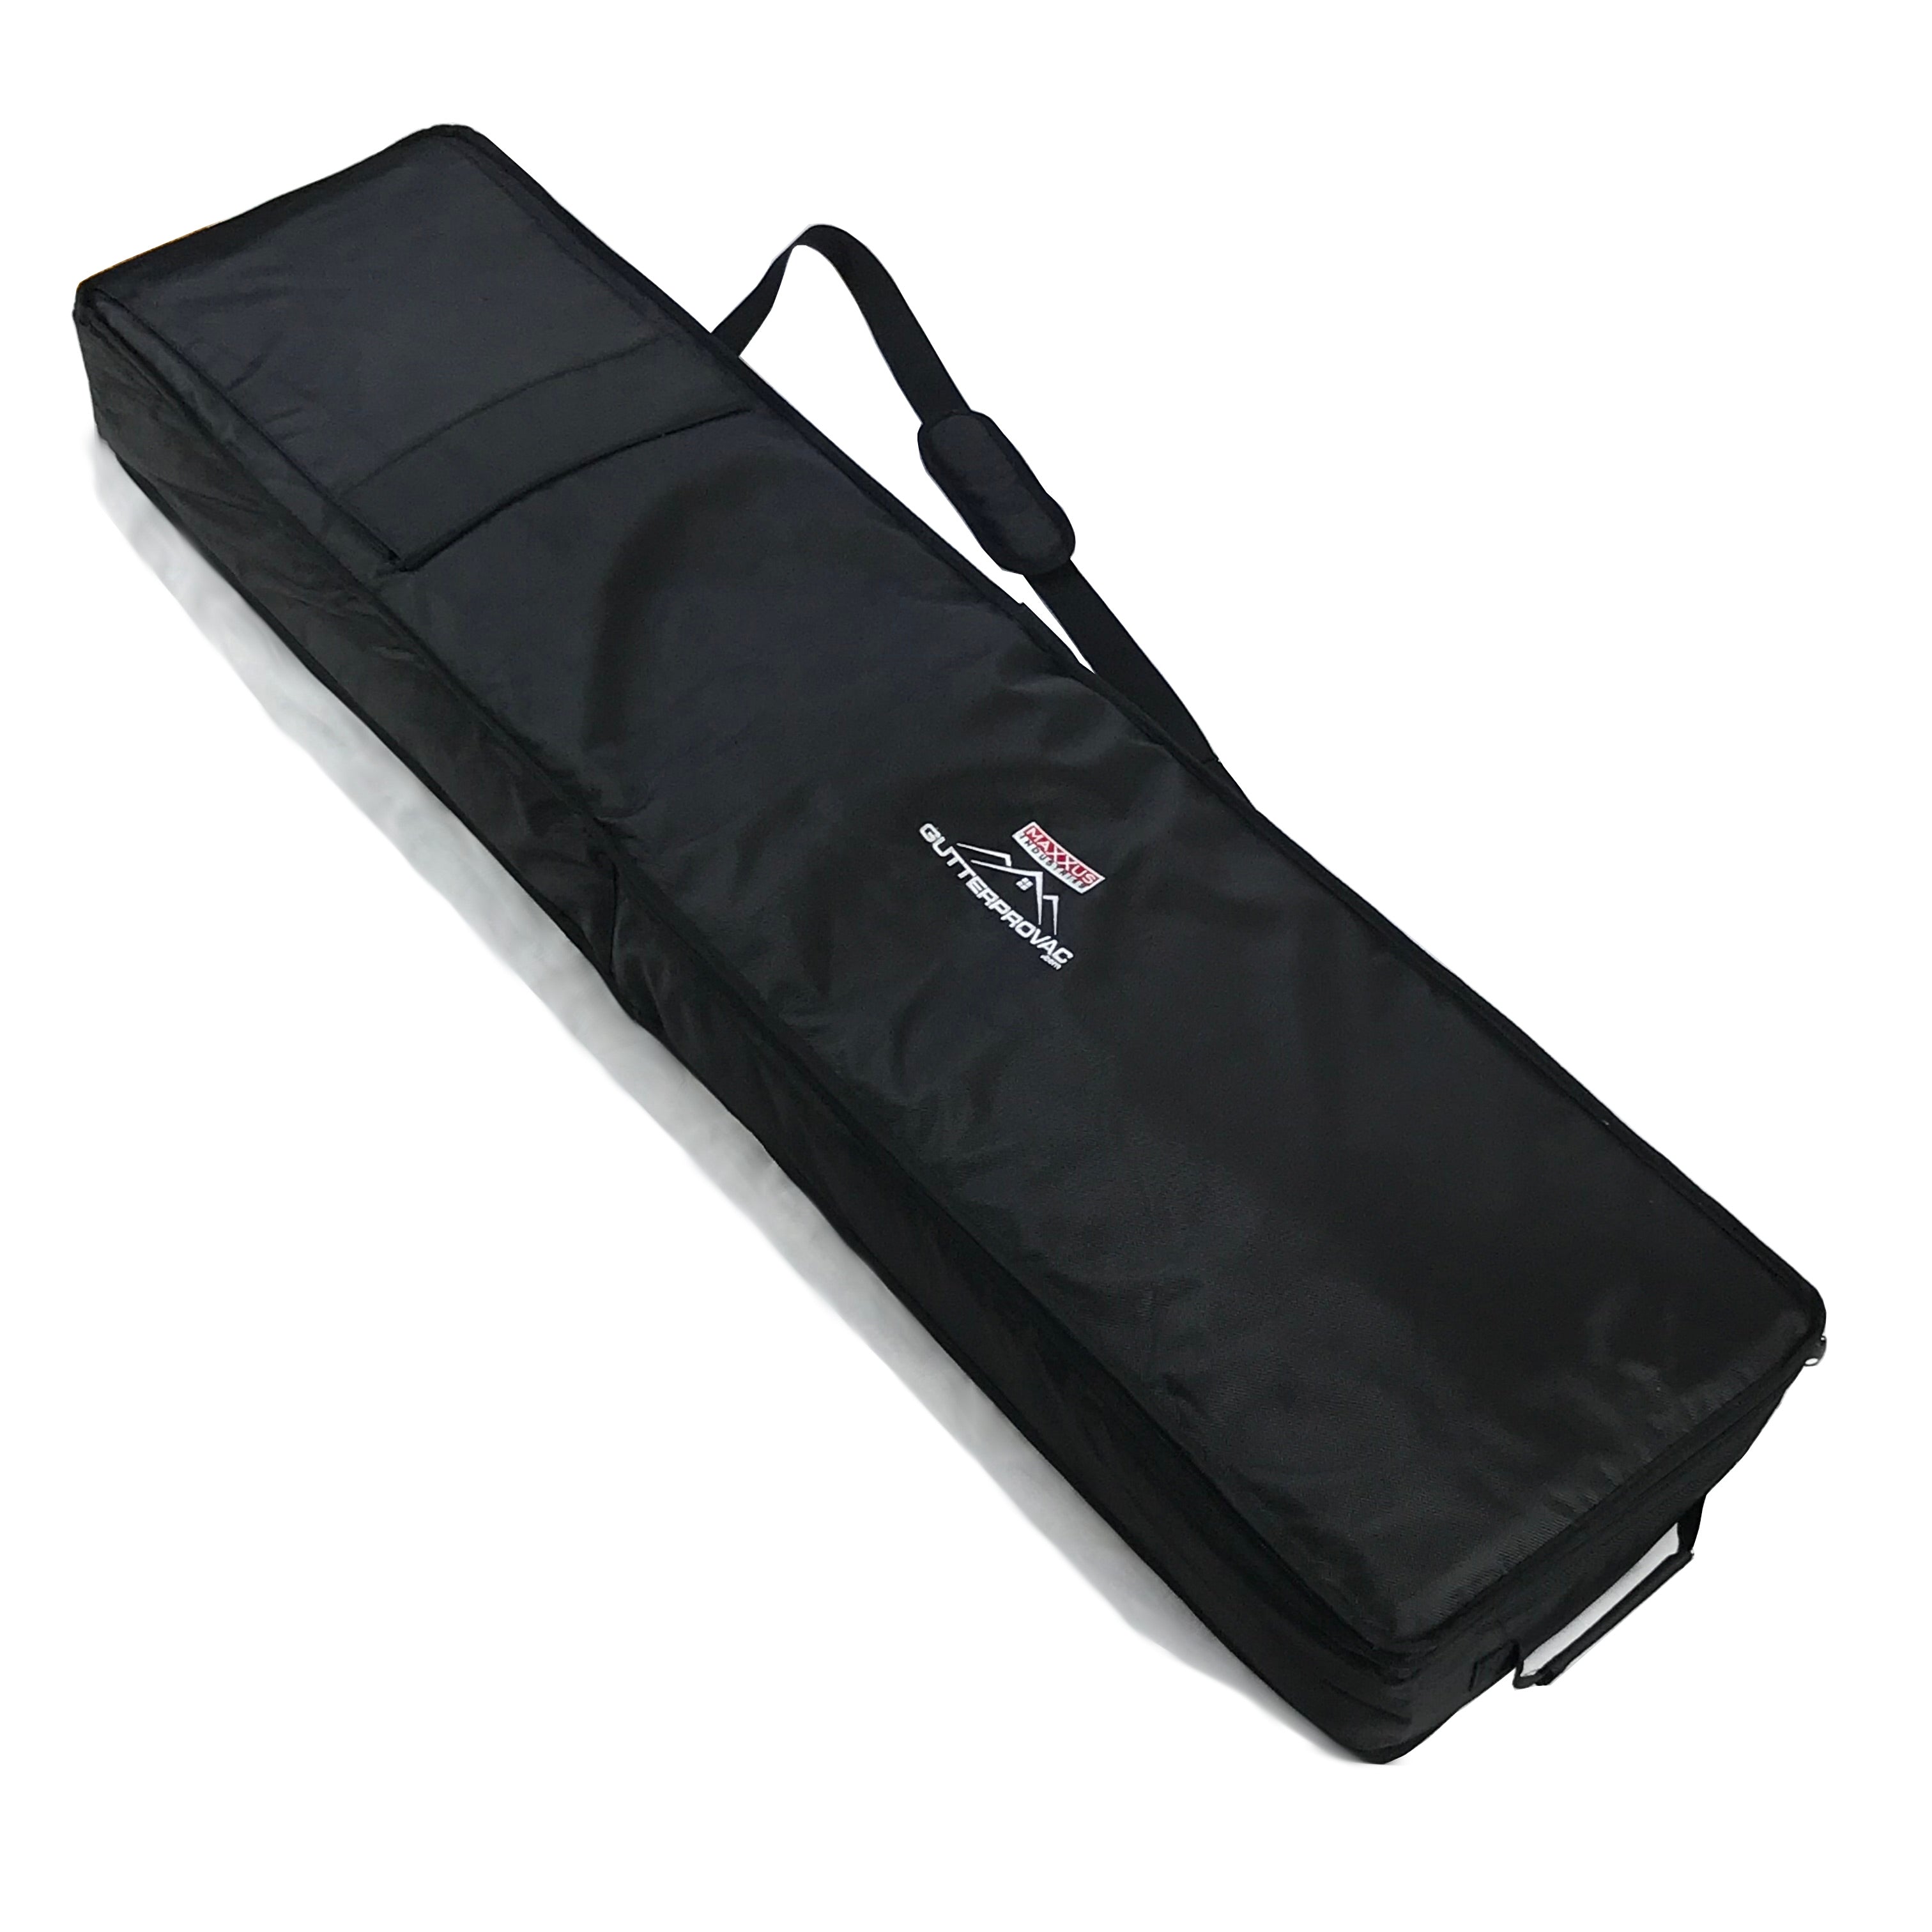 Carry Bag for Gutter Poles and Accessories